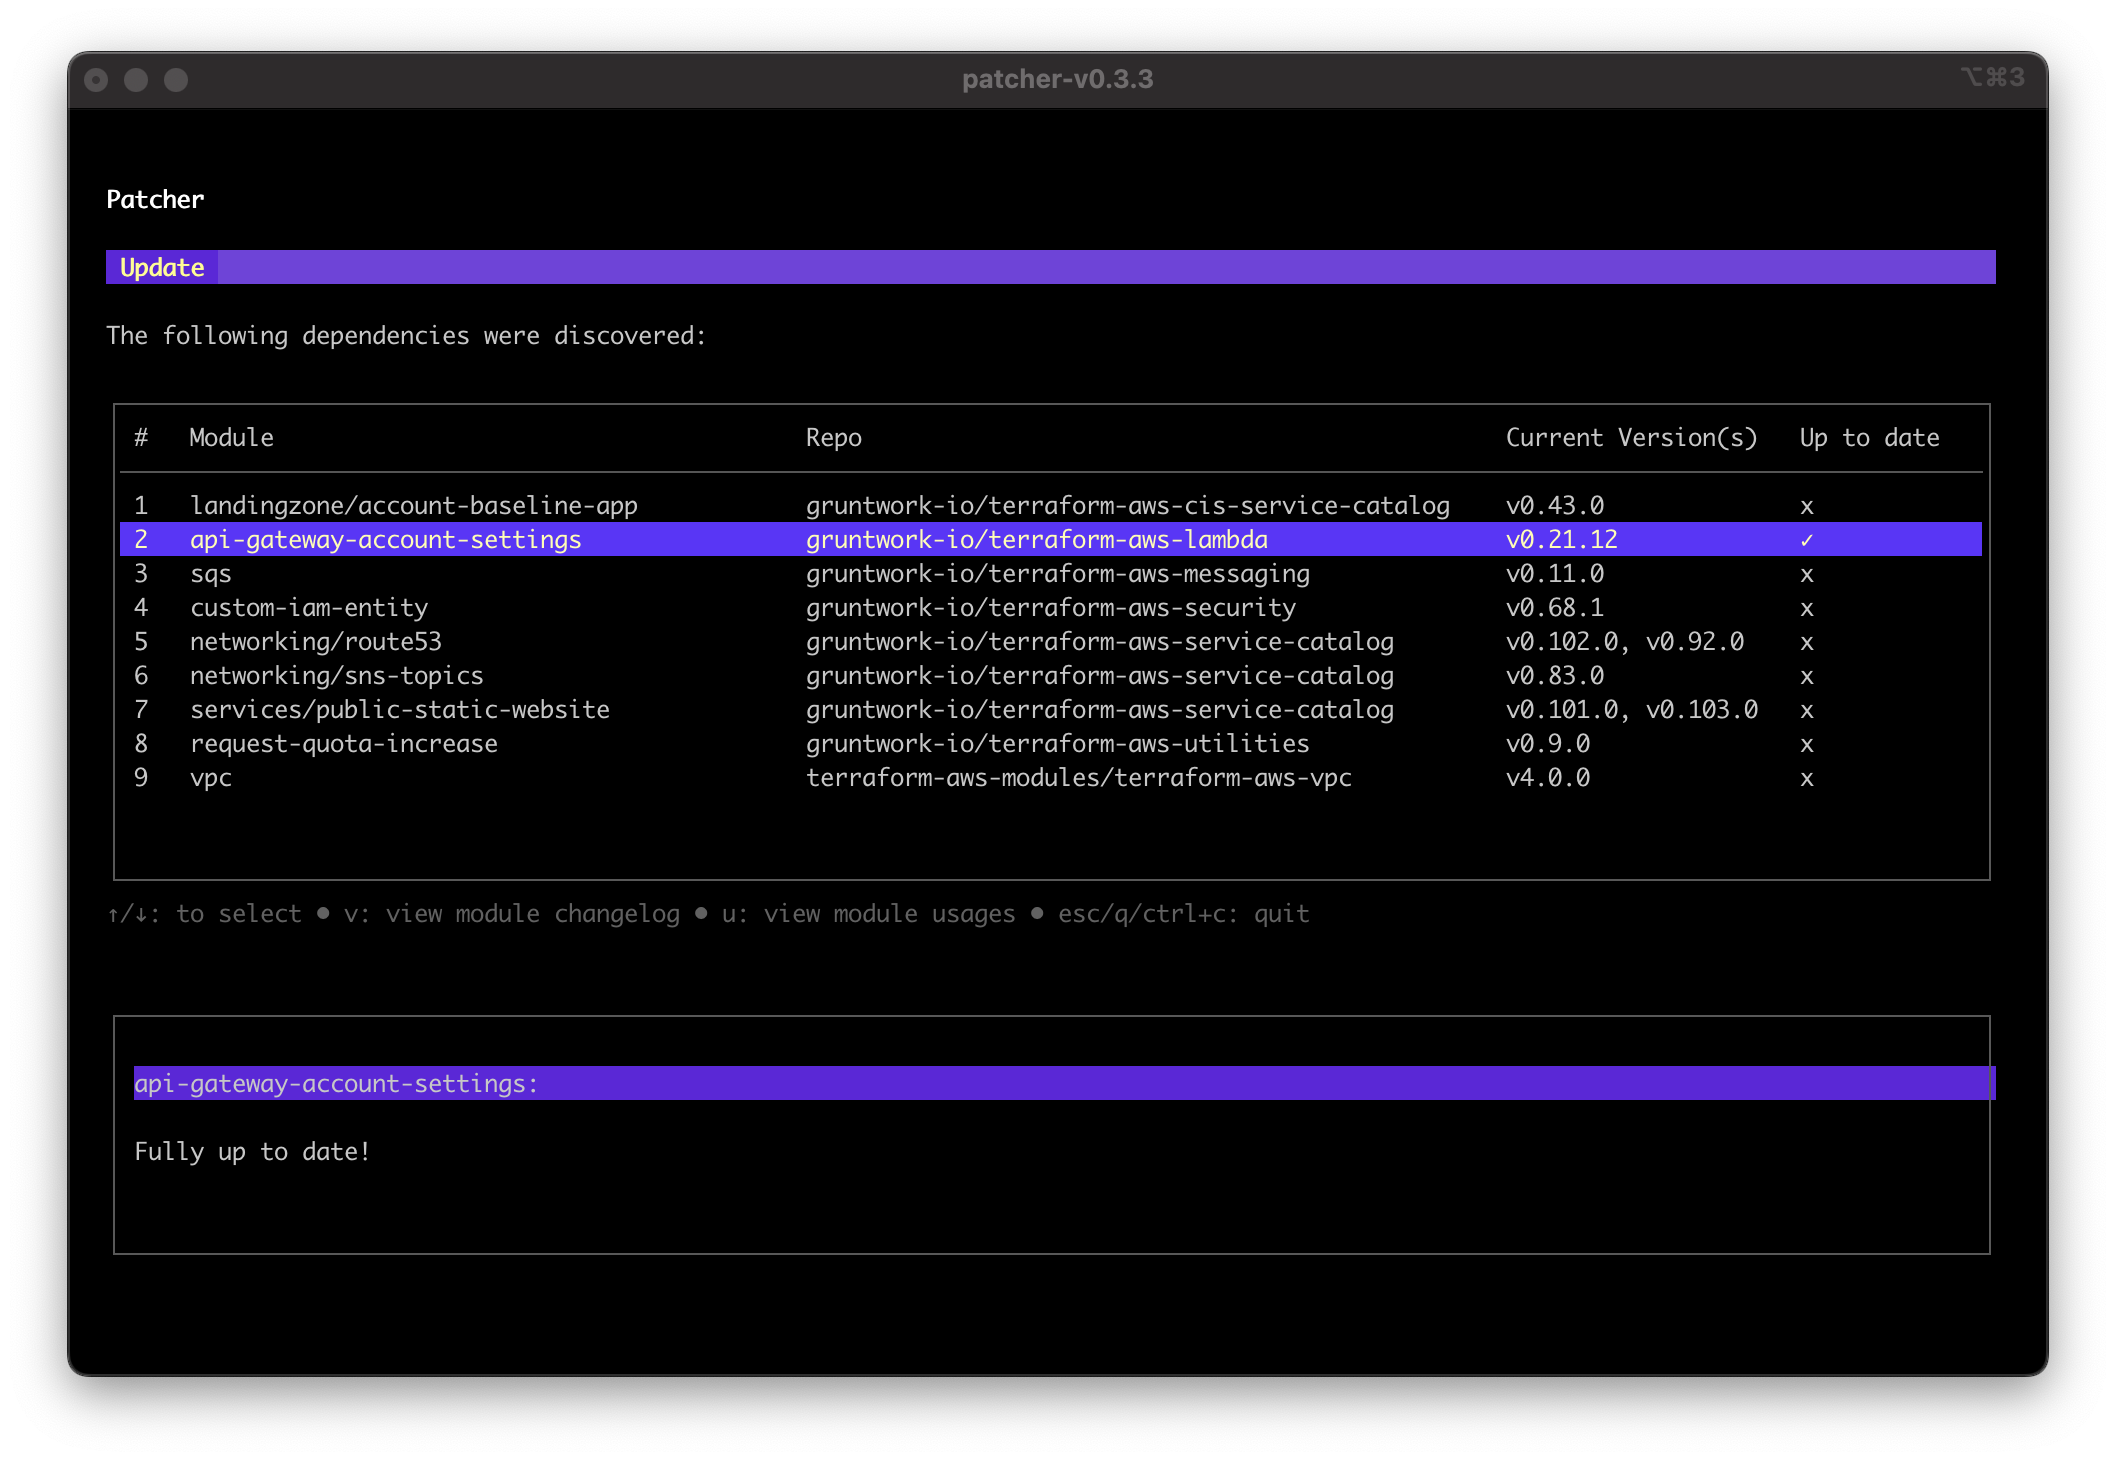 Patcher update screenshot showing dependendency that is fully up to date